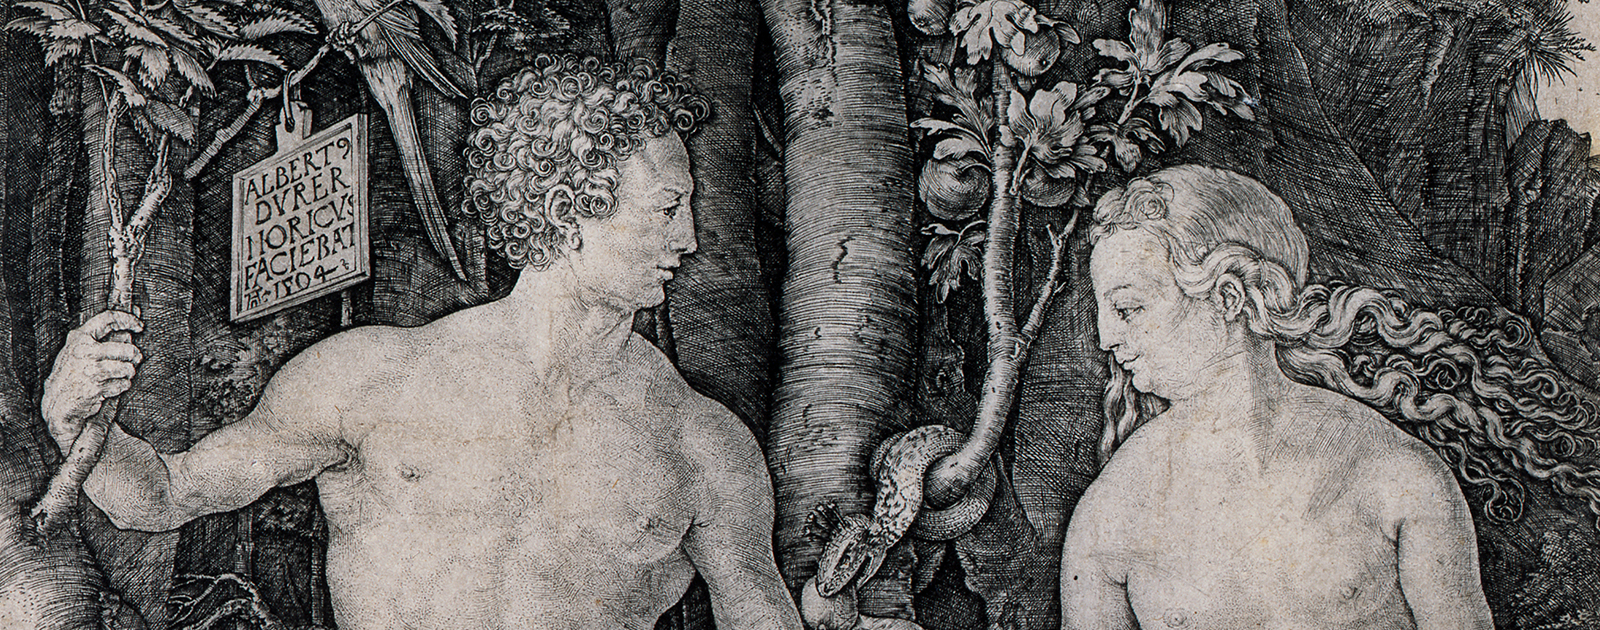 Adam and Eve by Durer